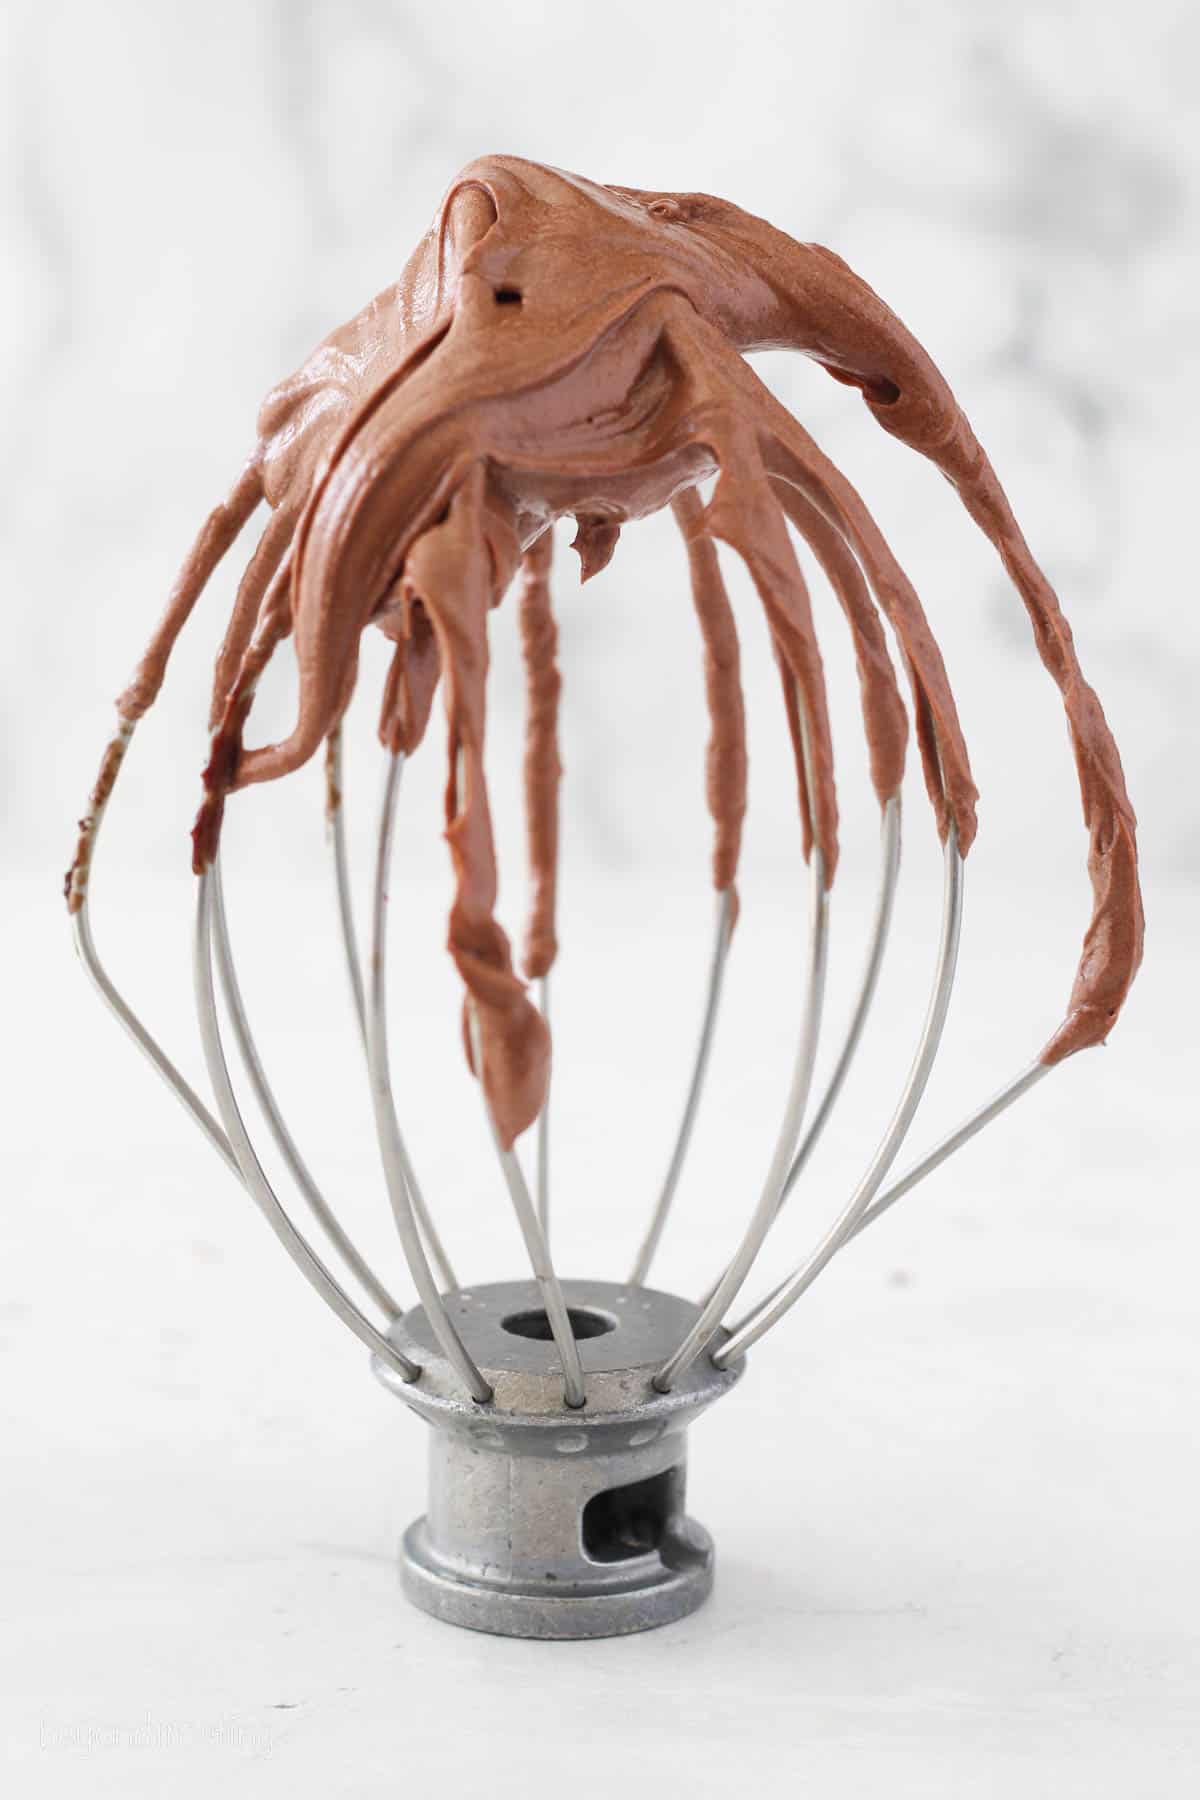 A stand mixer attachment topped with whipped ganache frosting.